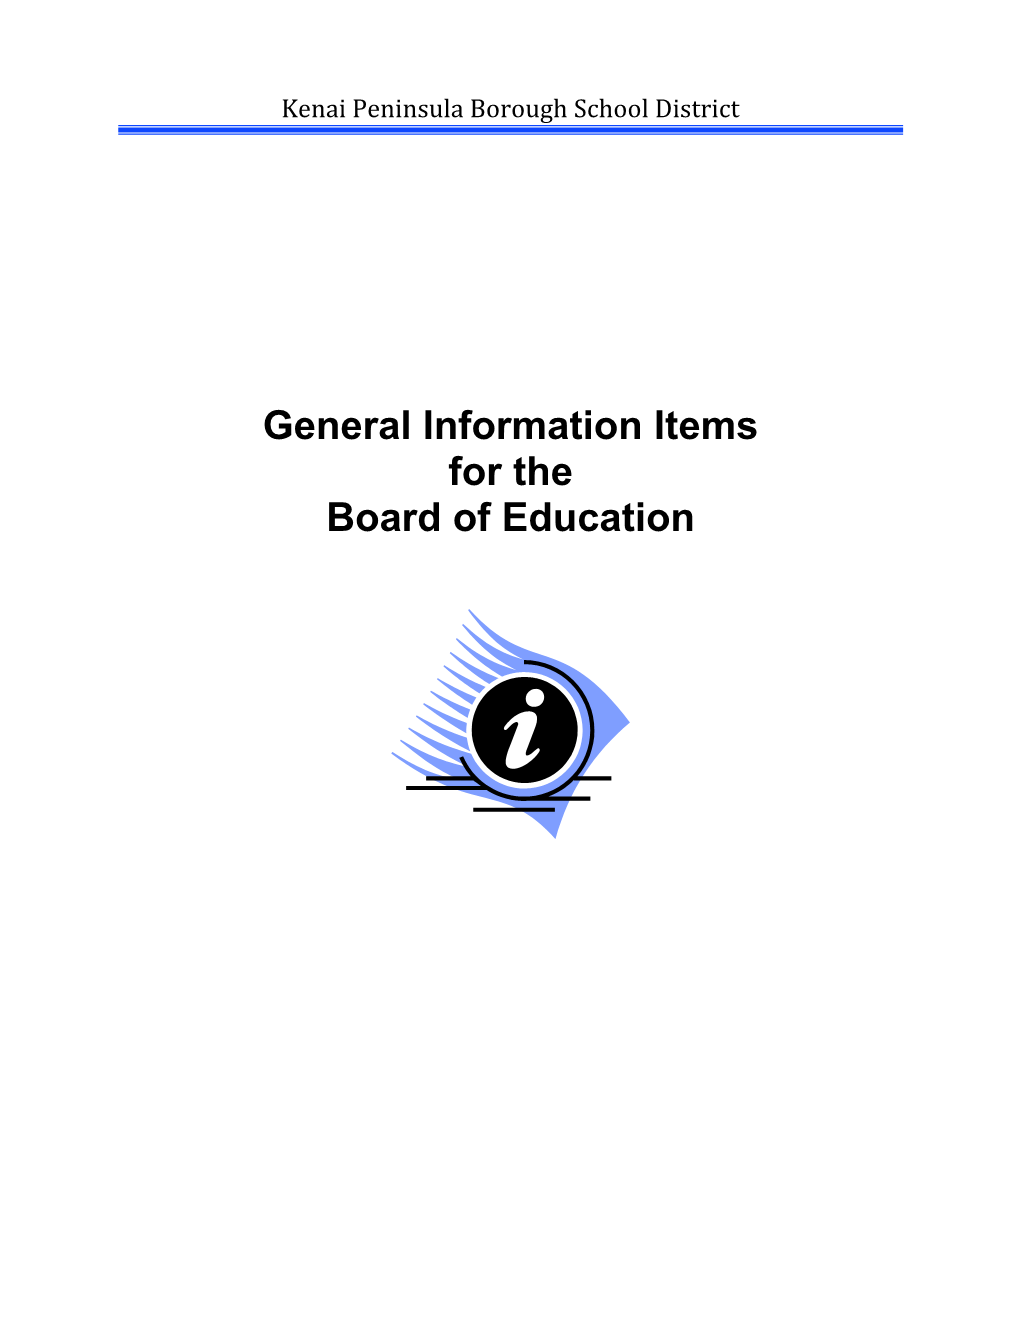 General Information Items for the Board of Education